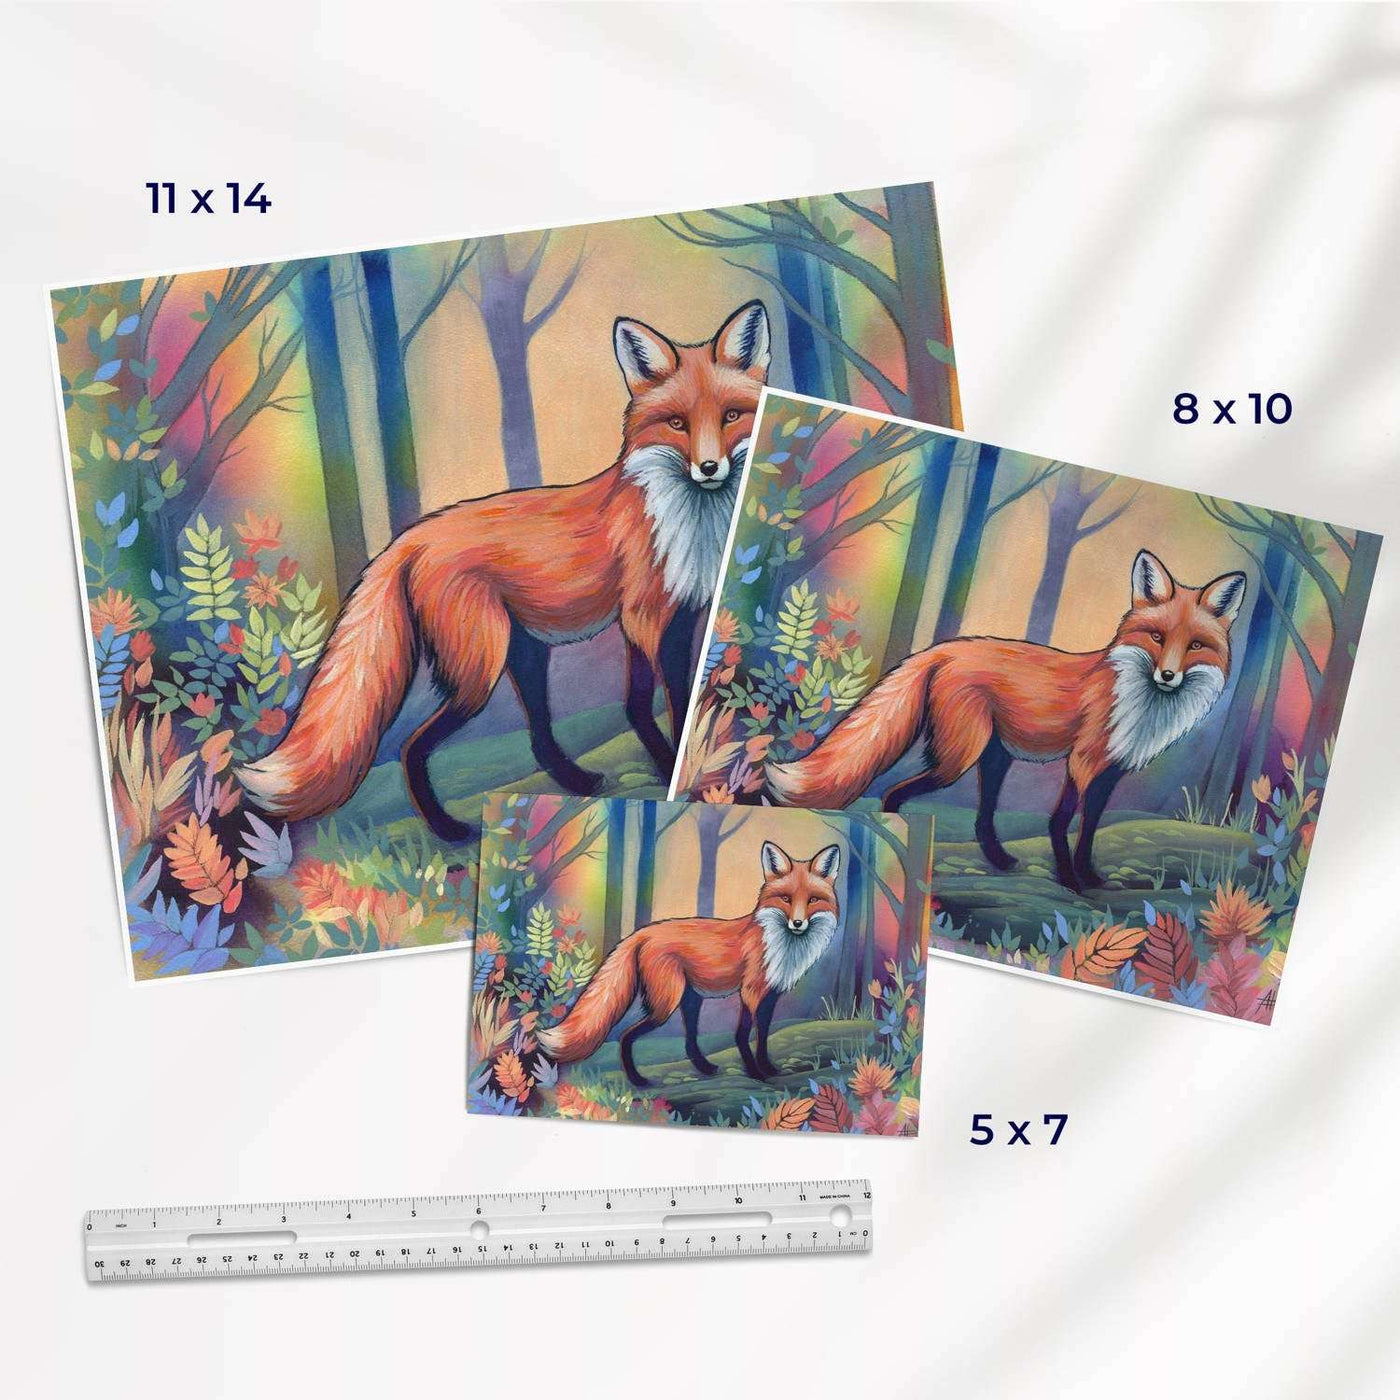 Three Twilight Watch - Fine Art Print Bundle of a fox in a forest with varying sizes displayed with a ruler for scale.